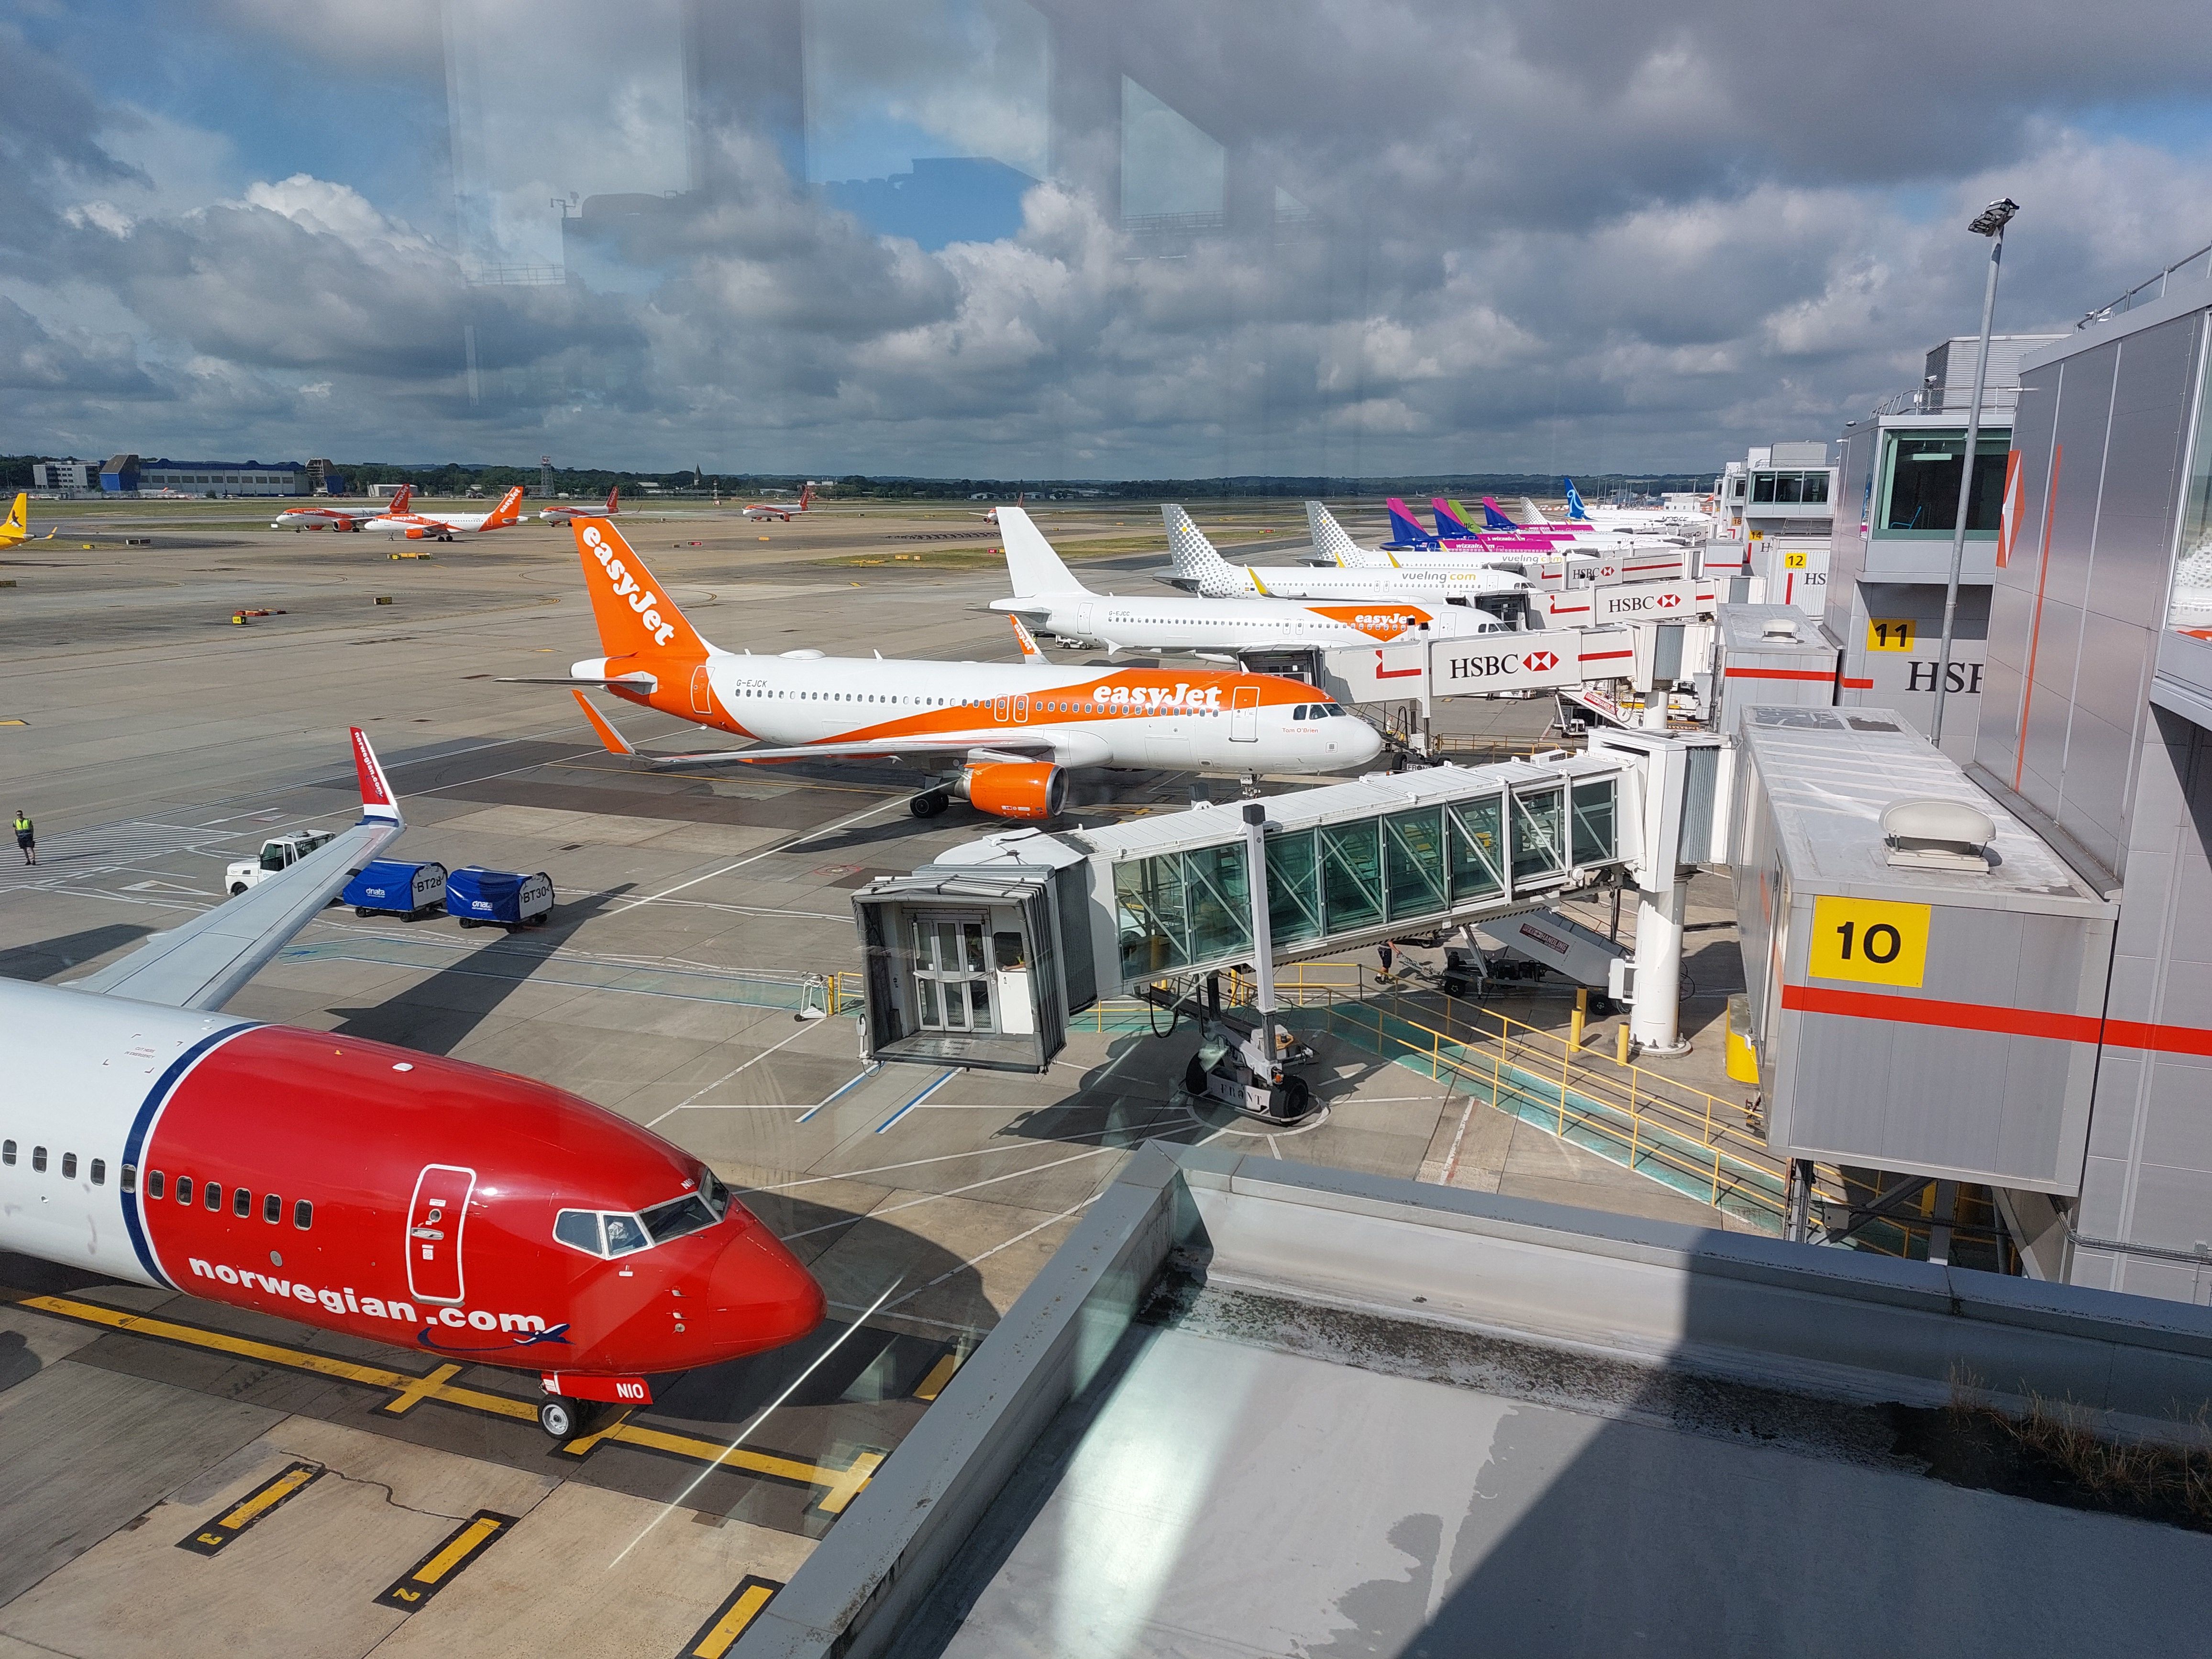 Narrowbody Airliners Lined Up At London Gatwick Airport.